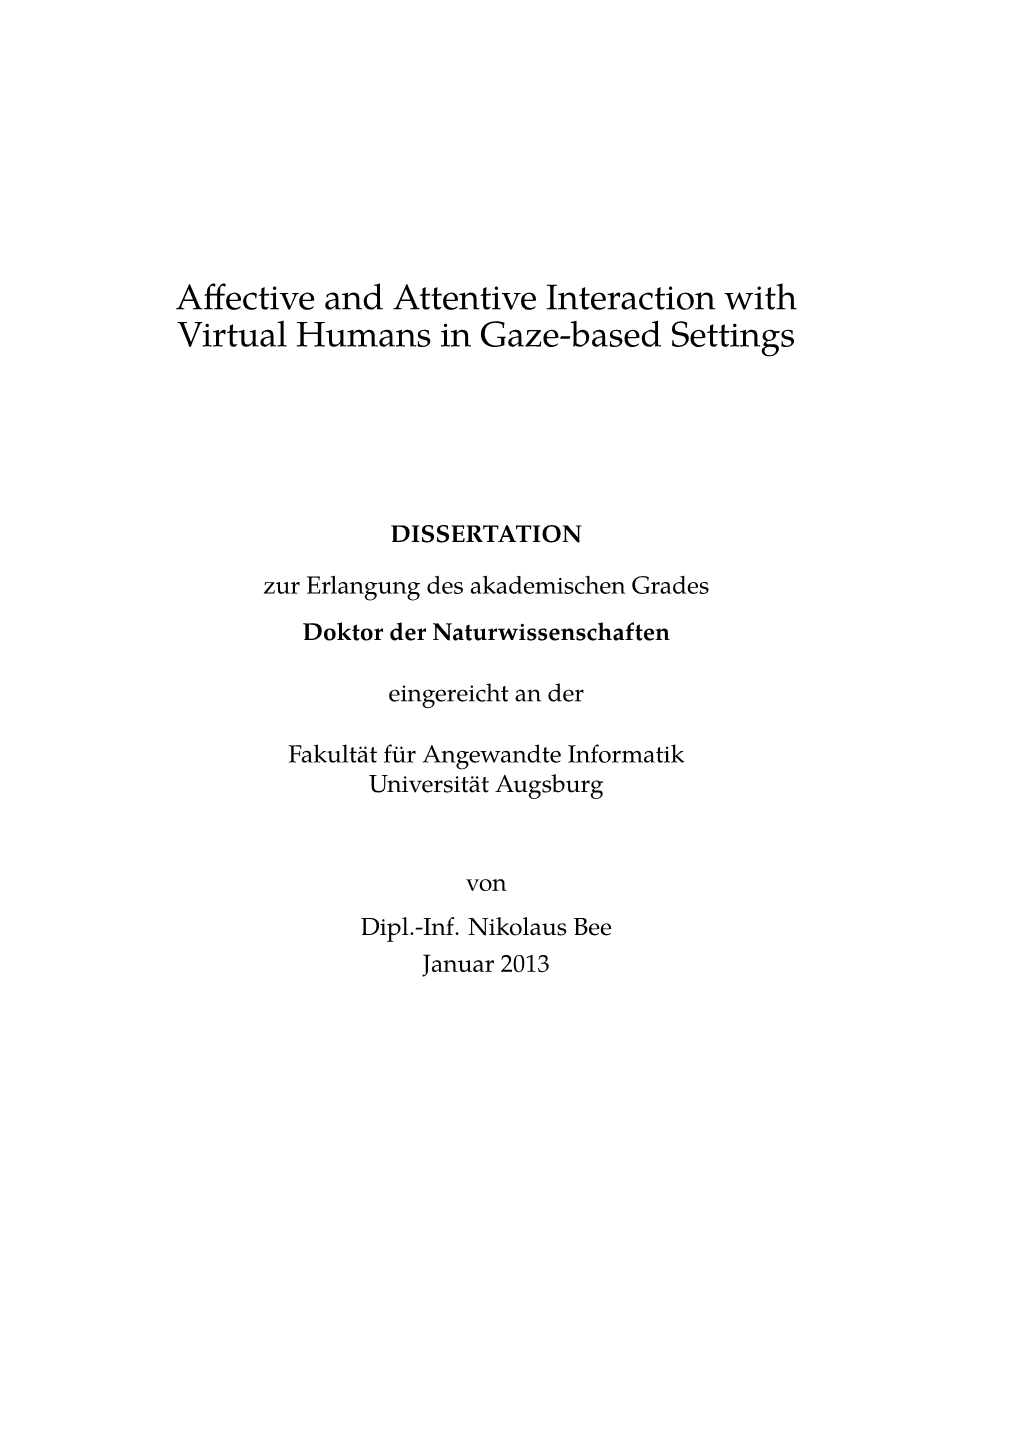 Affective and Attentive Interaction with Virtual Humans In